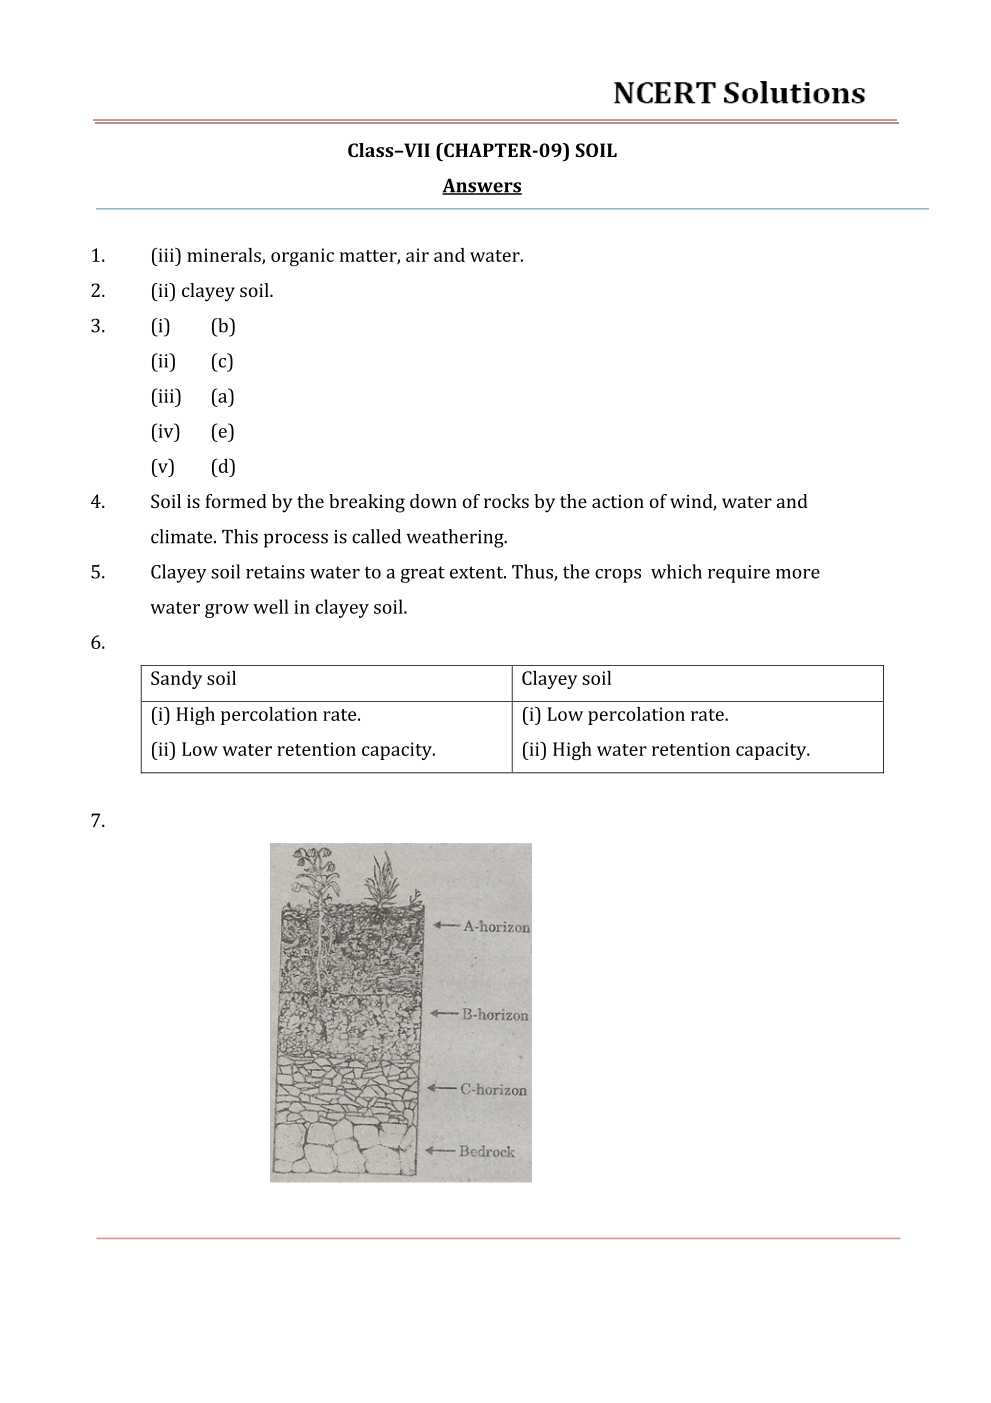 NCERT Solutions For Class 7 science Chapter 9 Soil